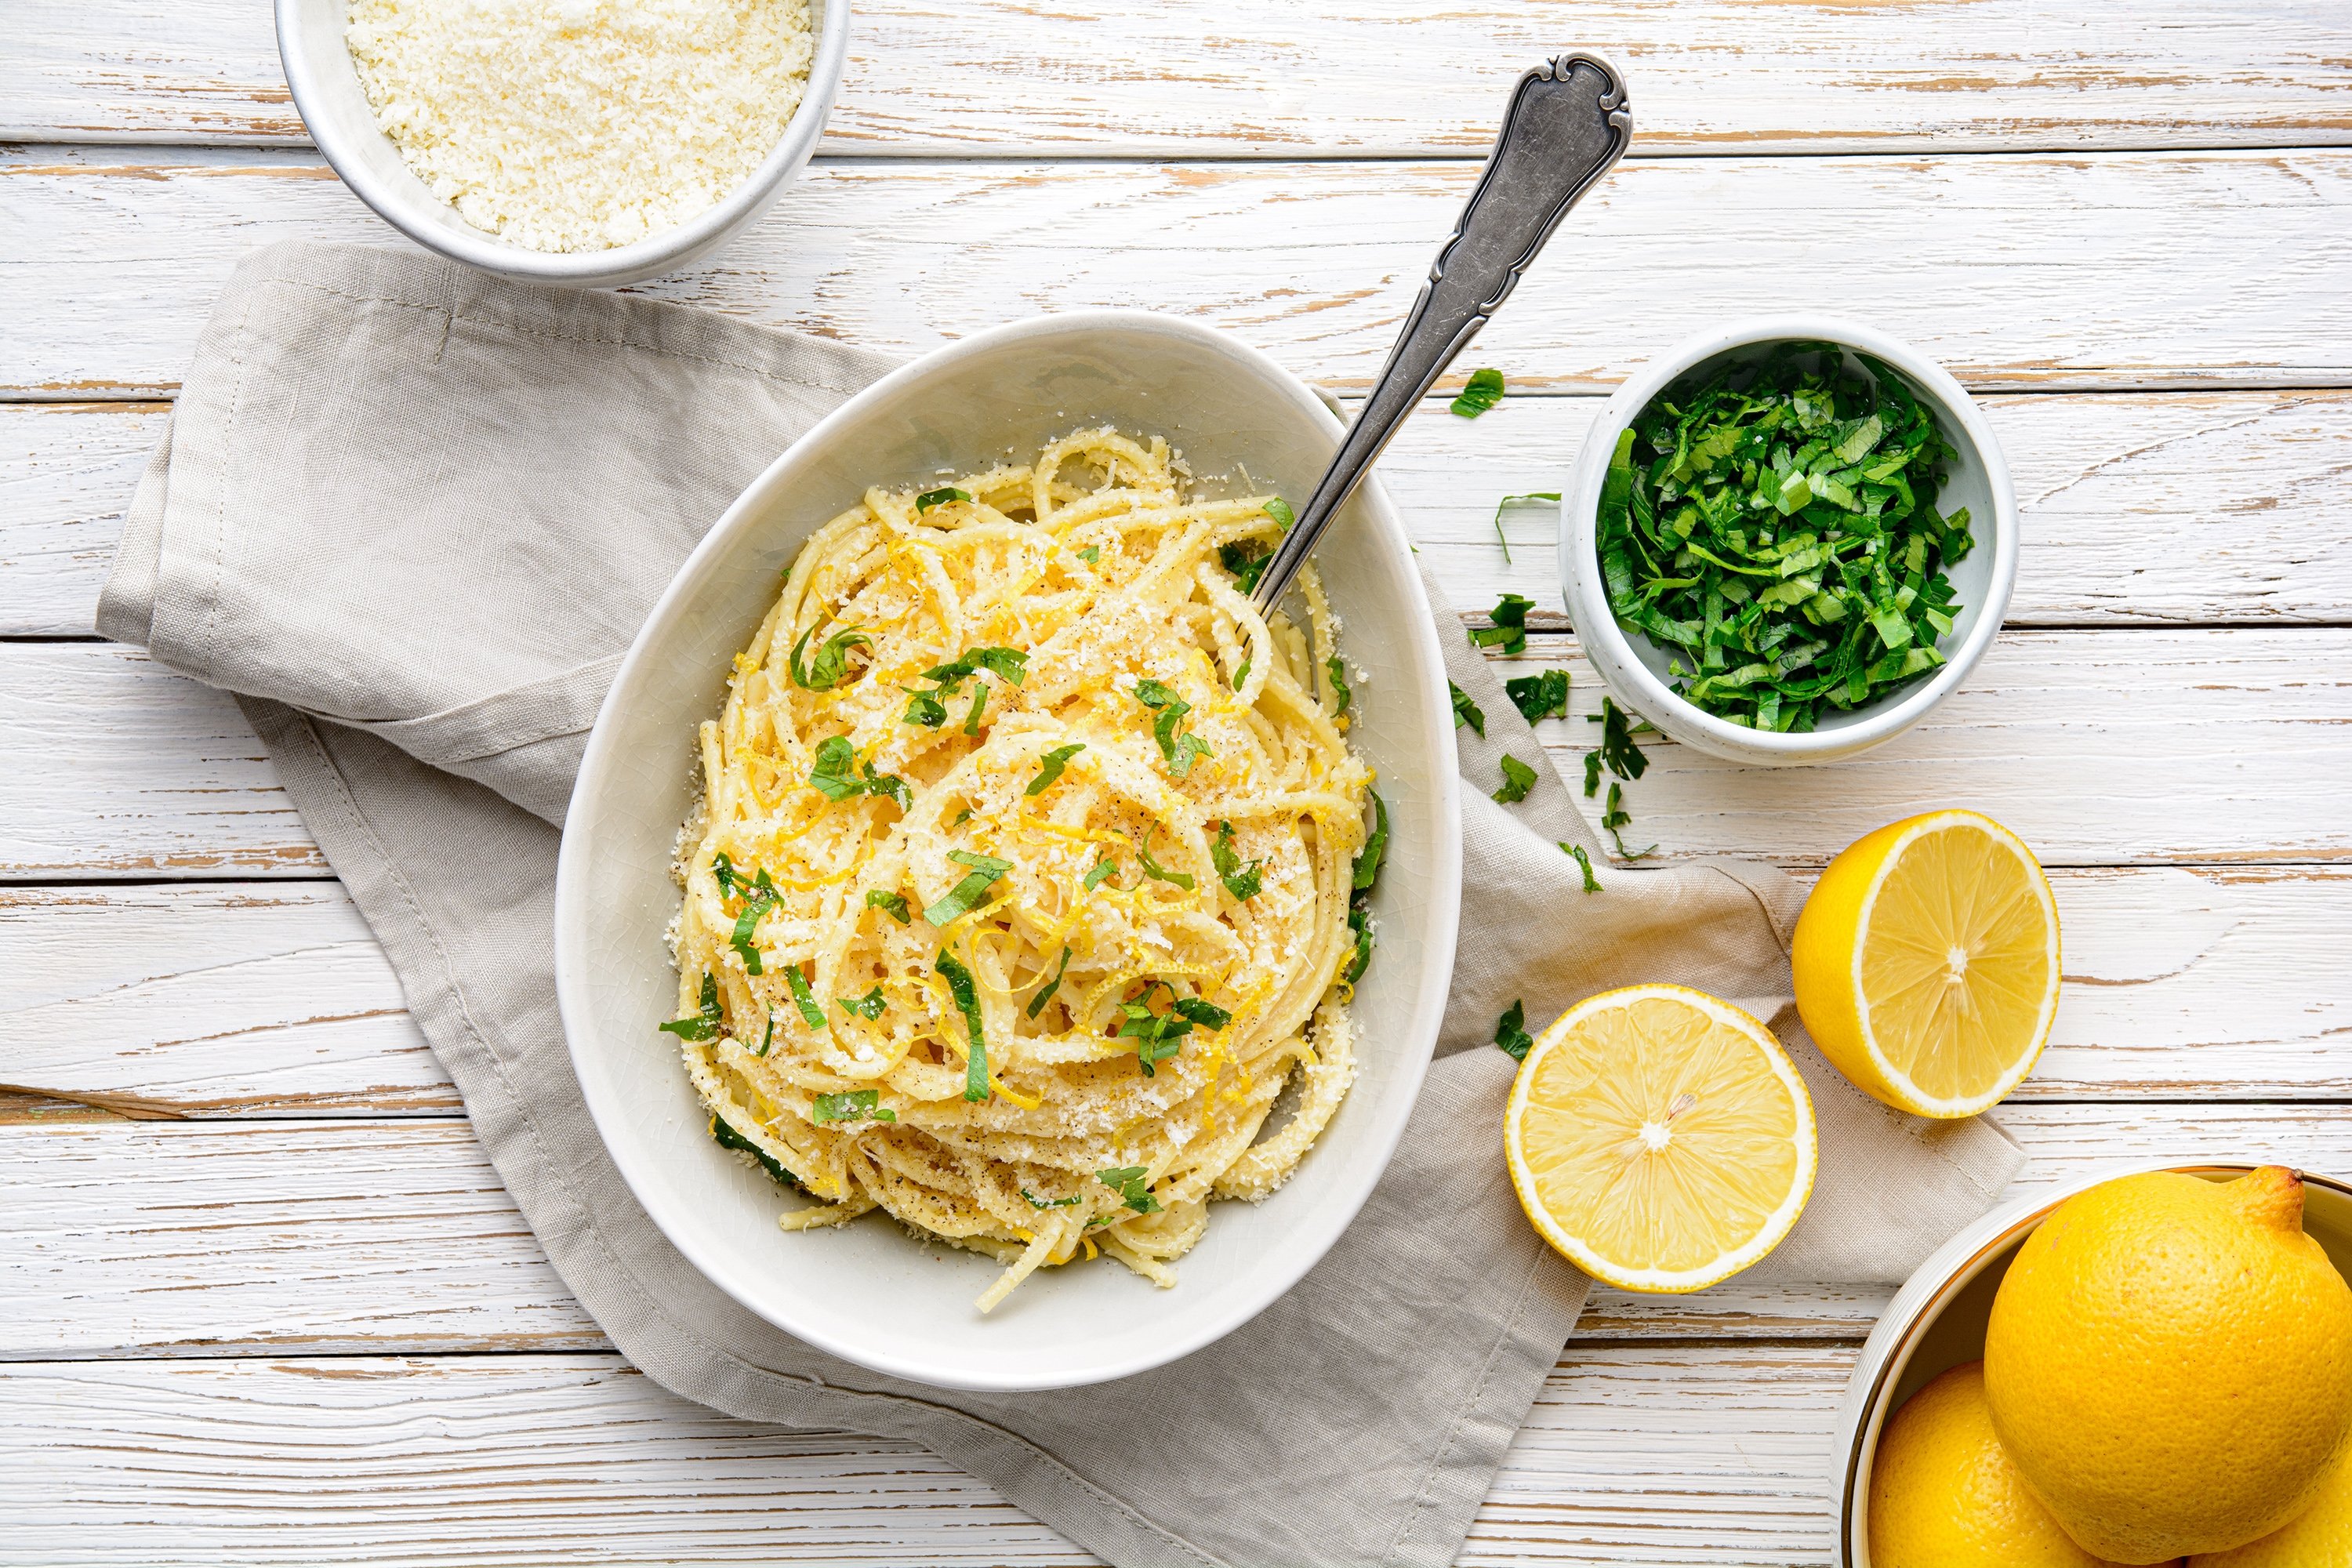 You can add a bit of heavy cream to classic spaghetti al limone to make it thicker and more filling. (Shutterstock Photo)